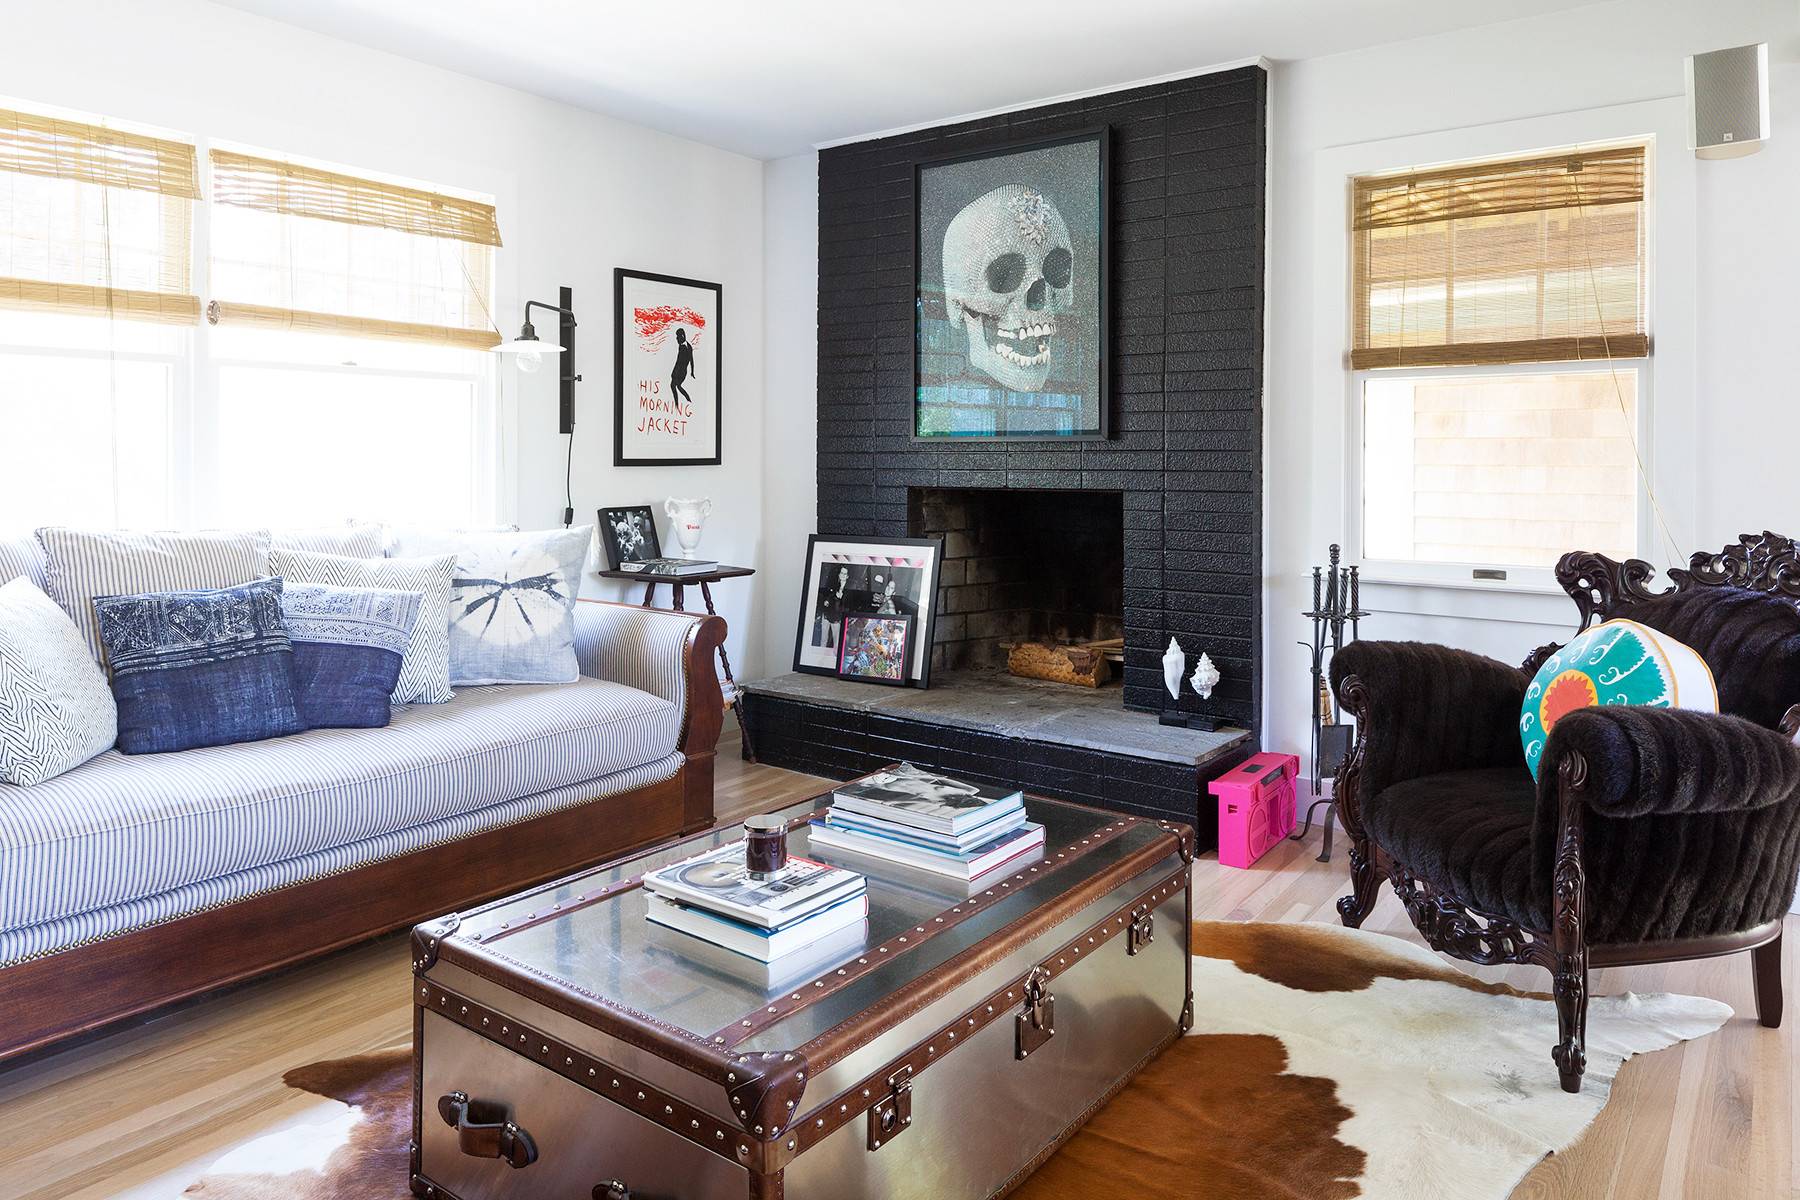 16 Photos Proving Why You Need a Cowhide Rug in Your Living Space